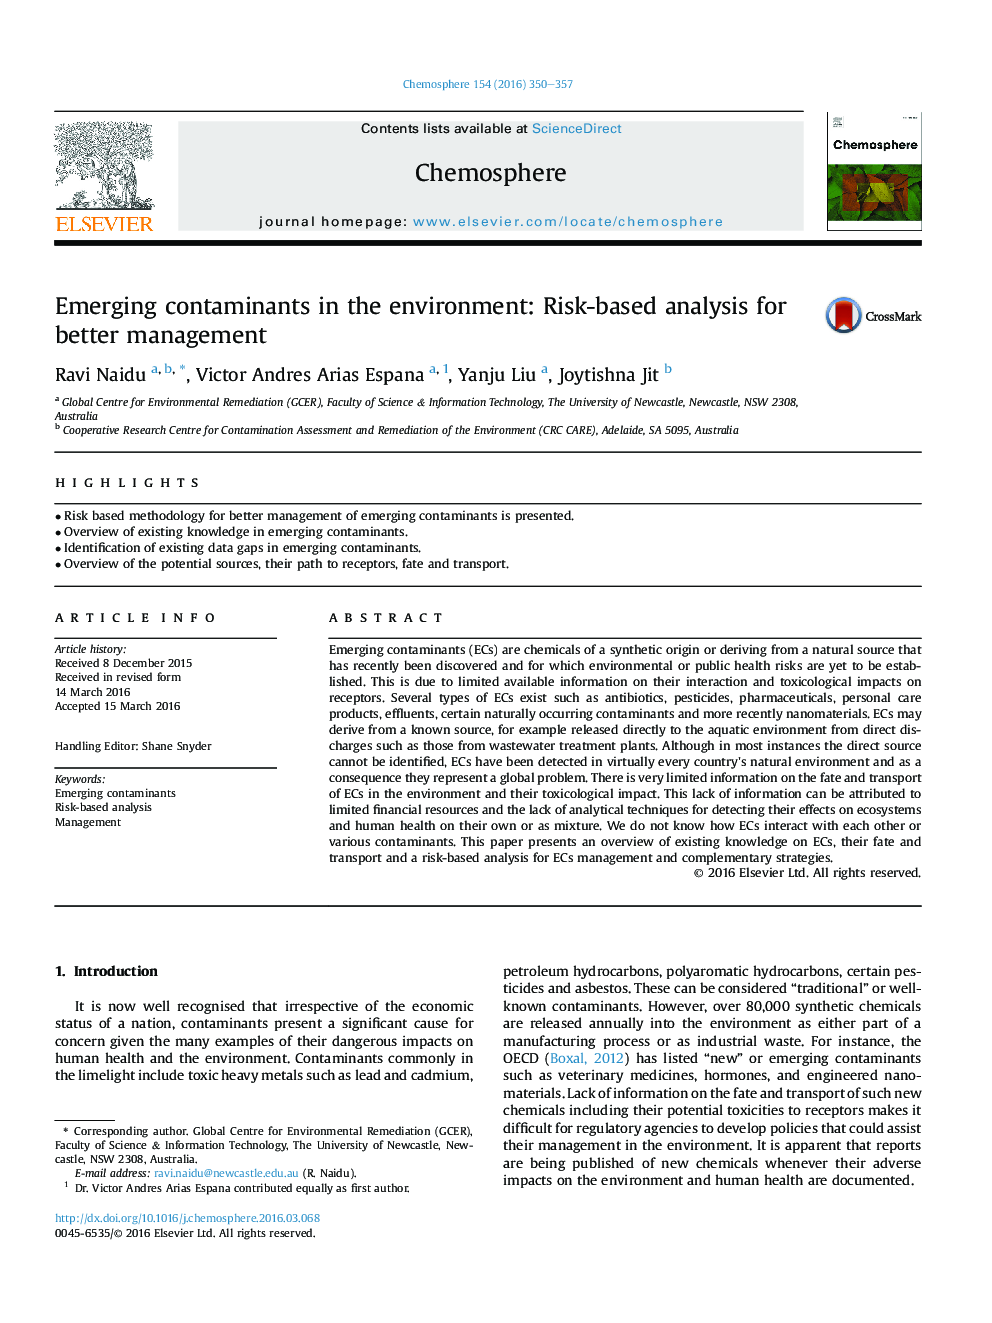 Emerging contaminants in the environment: Risk-based analysis for better management